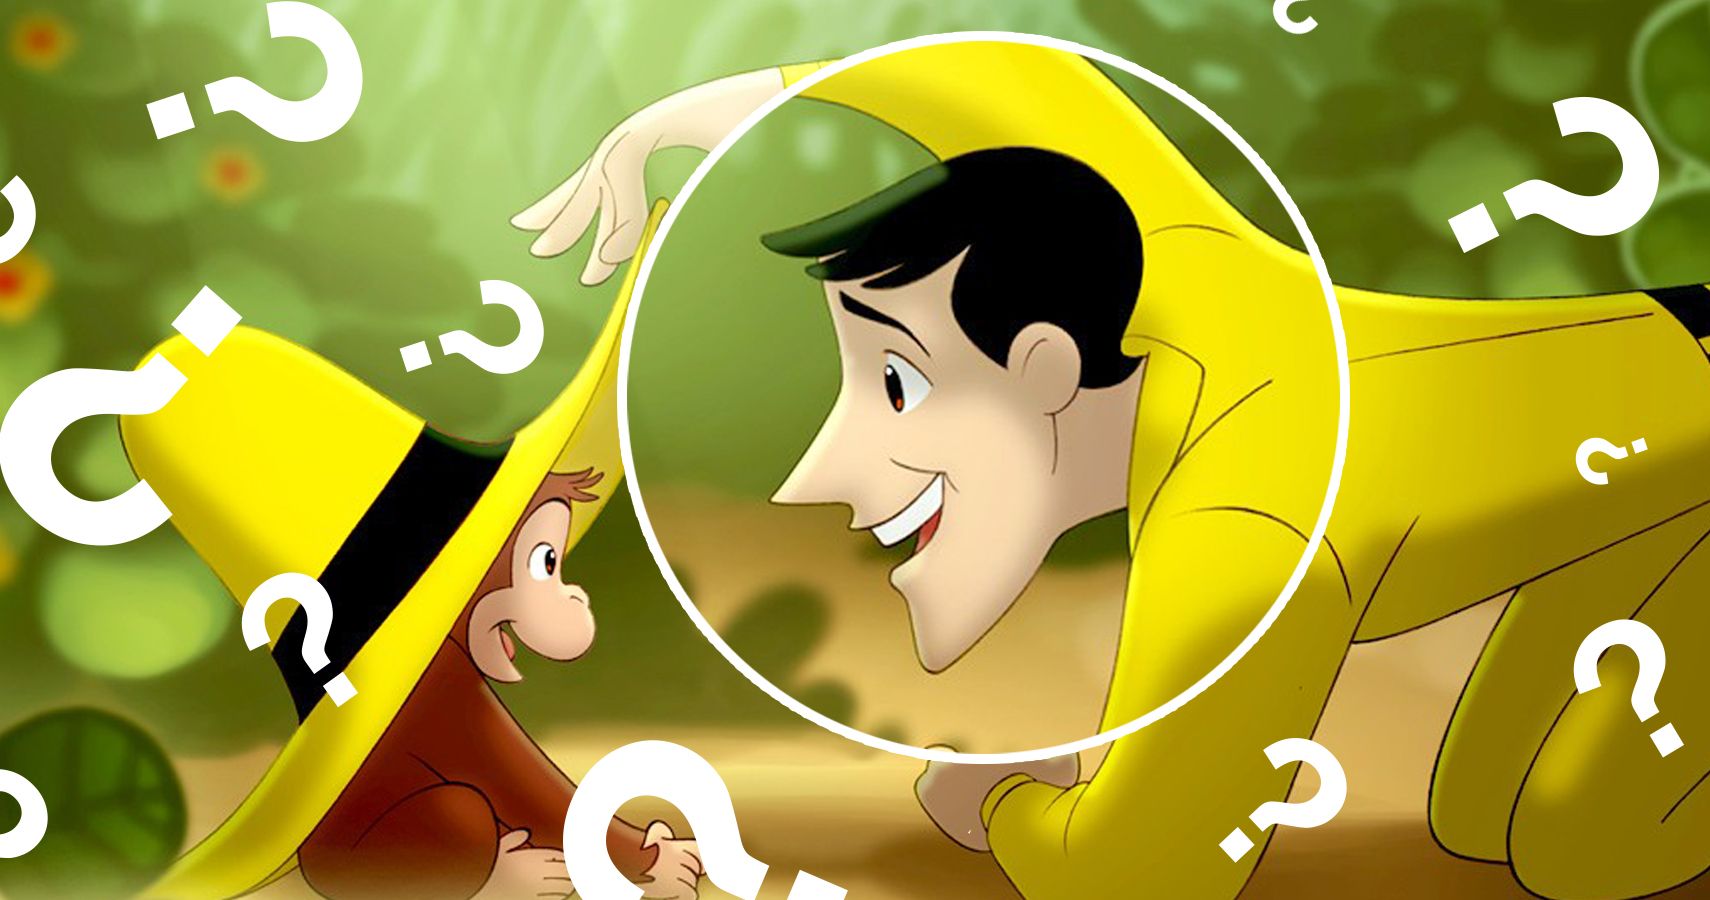 curious george episodes where the man in the yellow hat is sick